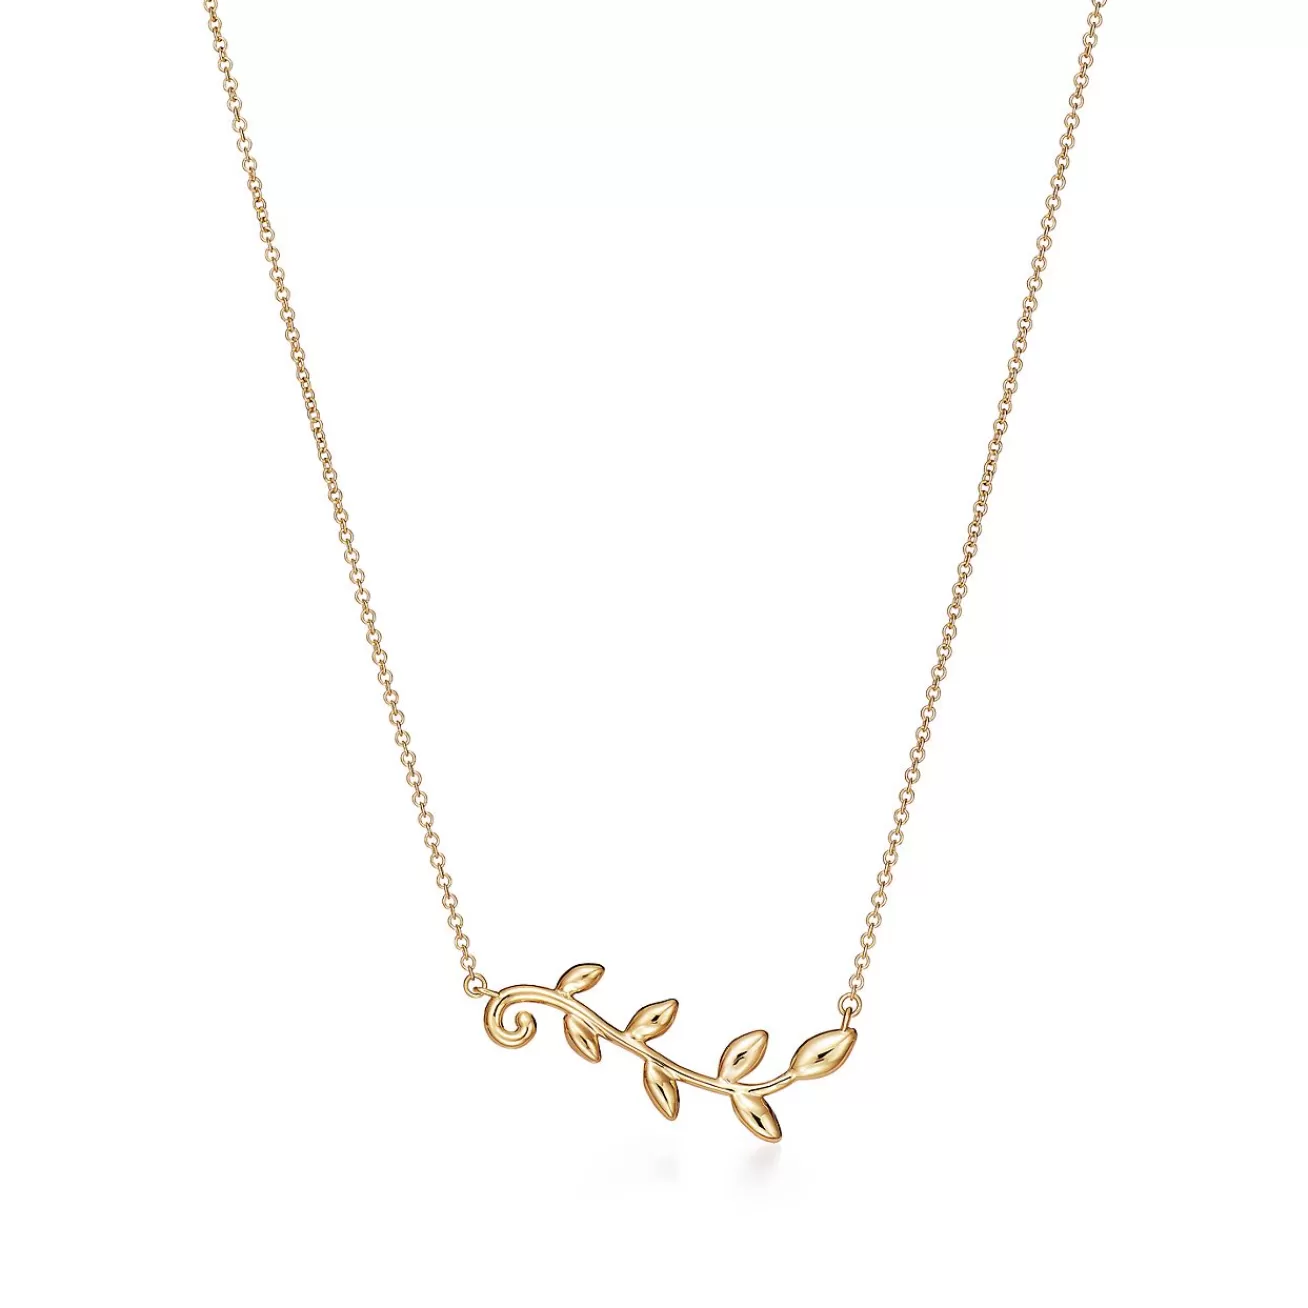 Tiffany & Co. Paloma Picasso® Olive Leaf vine pendant in 18k gold. | ^ Necklaces & Pendants | Gifts for Her